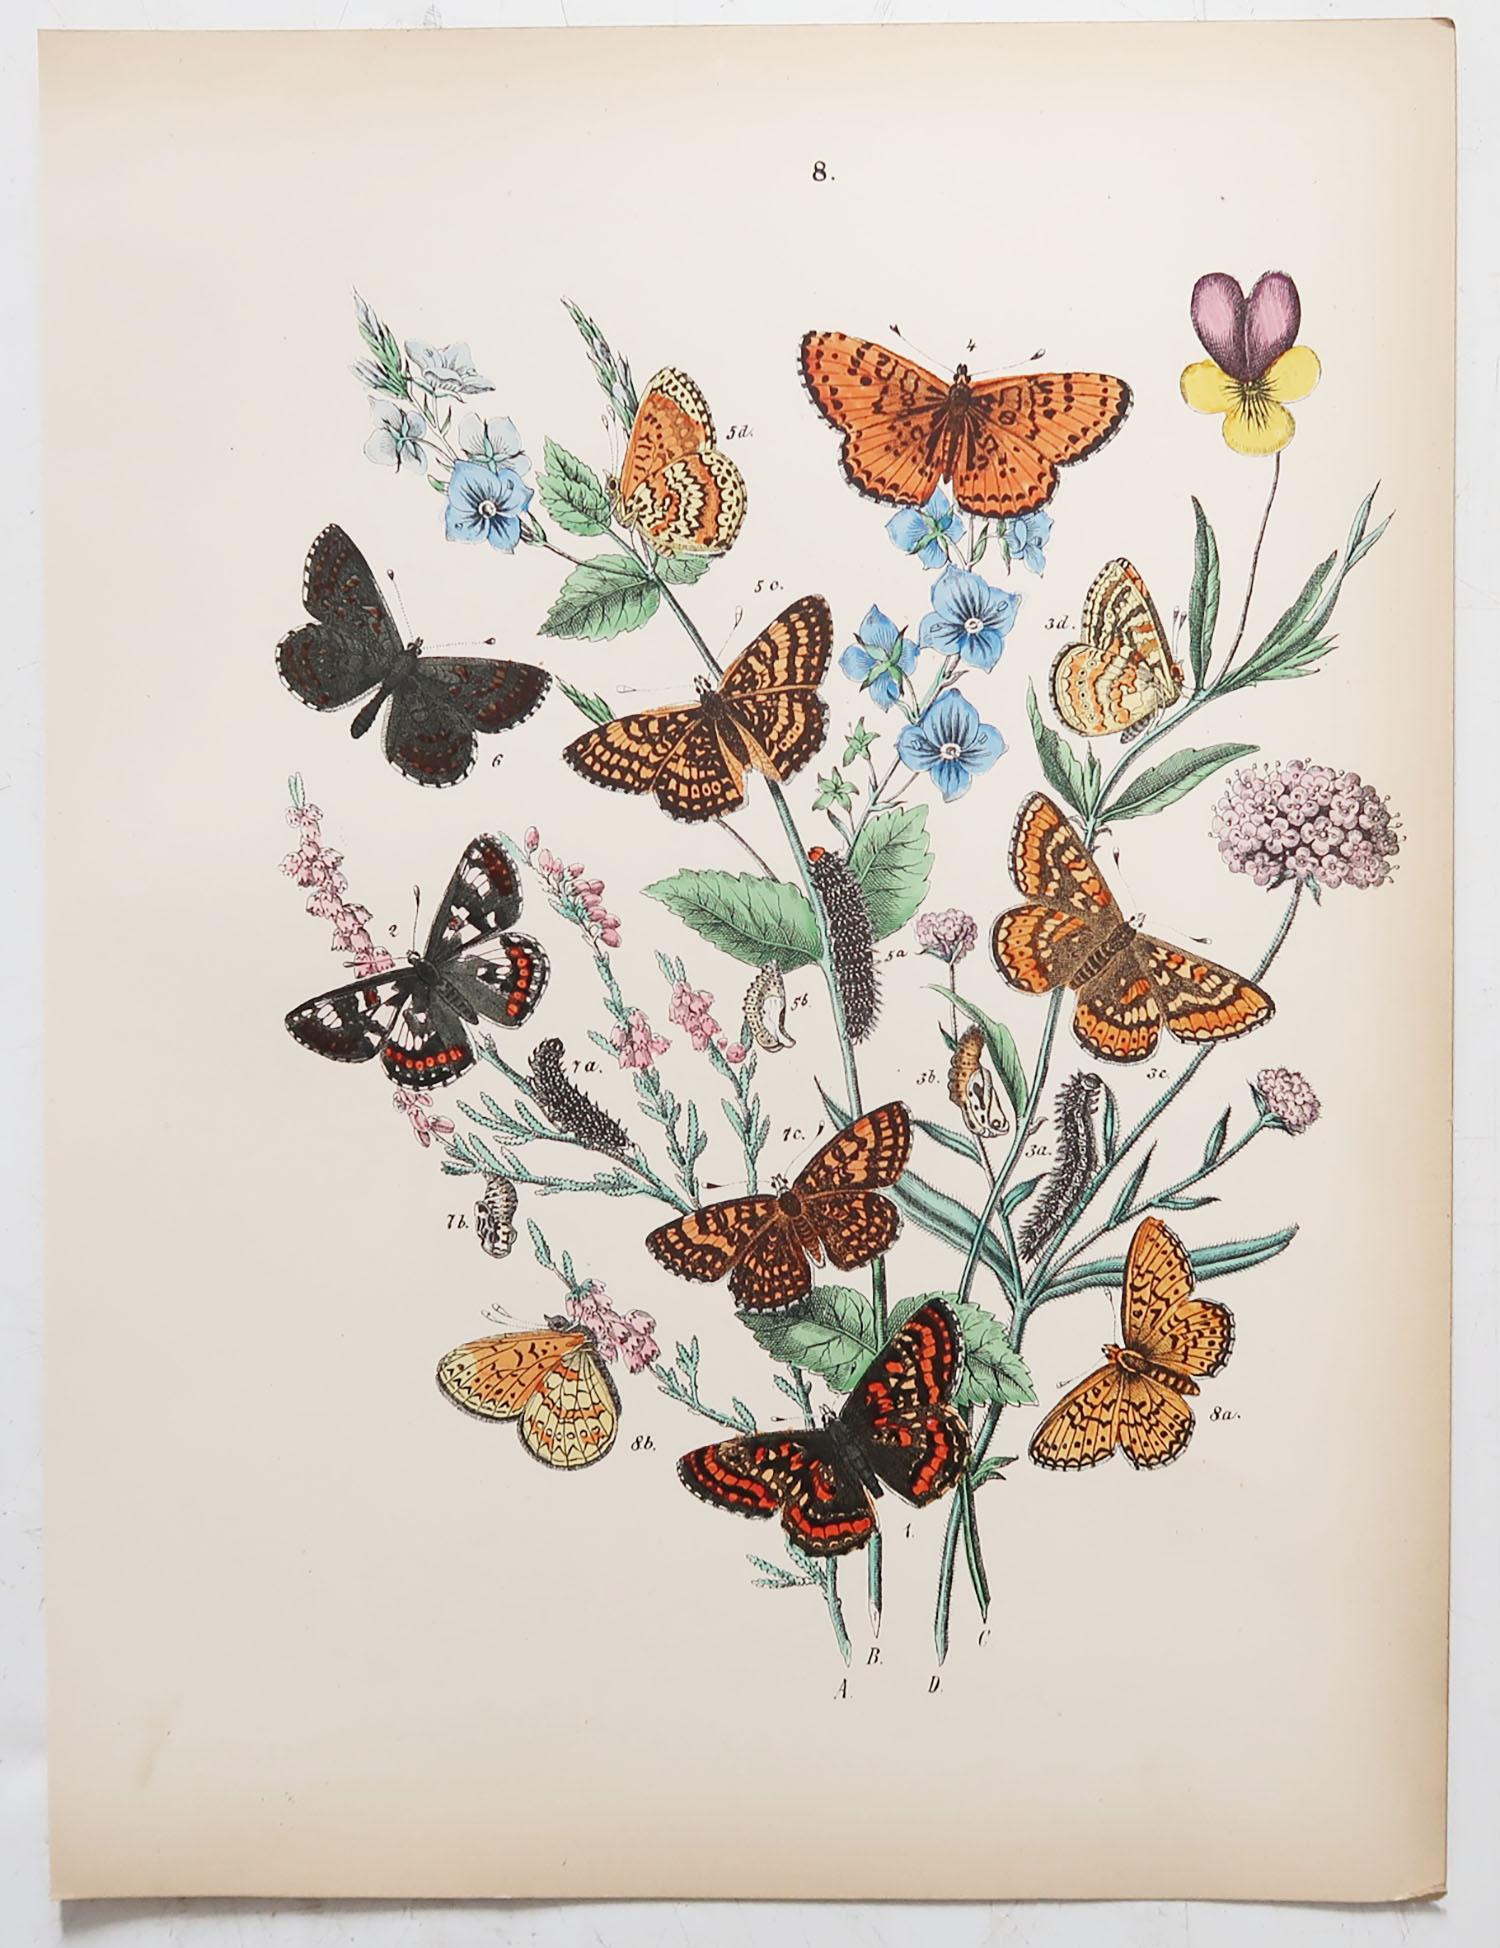 Great set of butterfly prints. 

Lithographs with original color

Published, circa 1880

Unframed

The measurement given below is for one print.